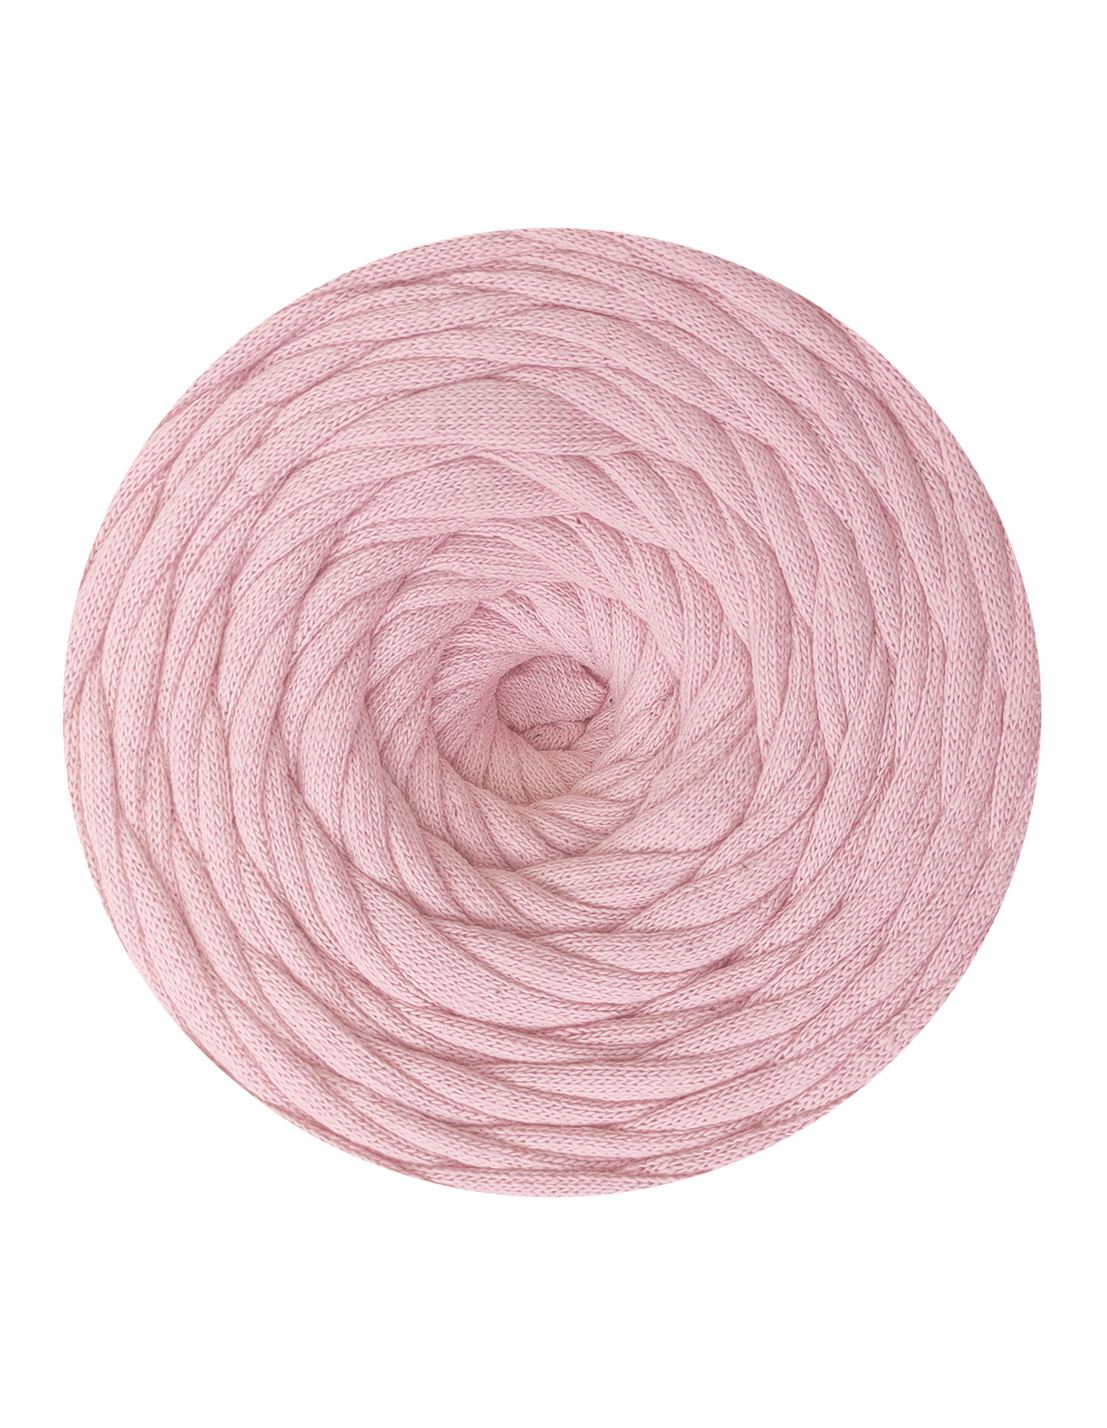 Dolly Pink Jersey Be Good t-shirt yarn by Wool and the Gang (500g)